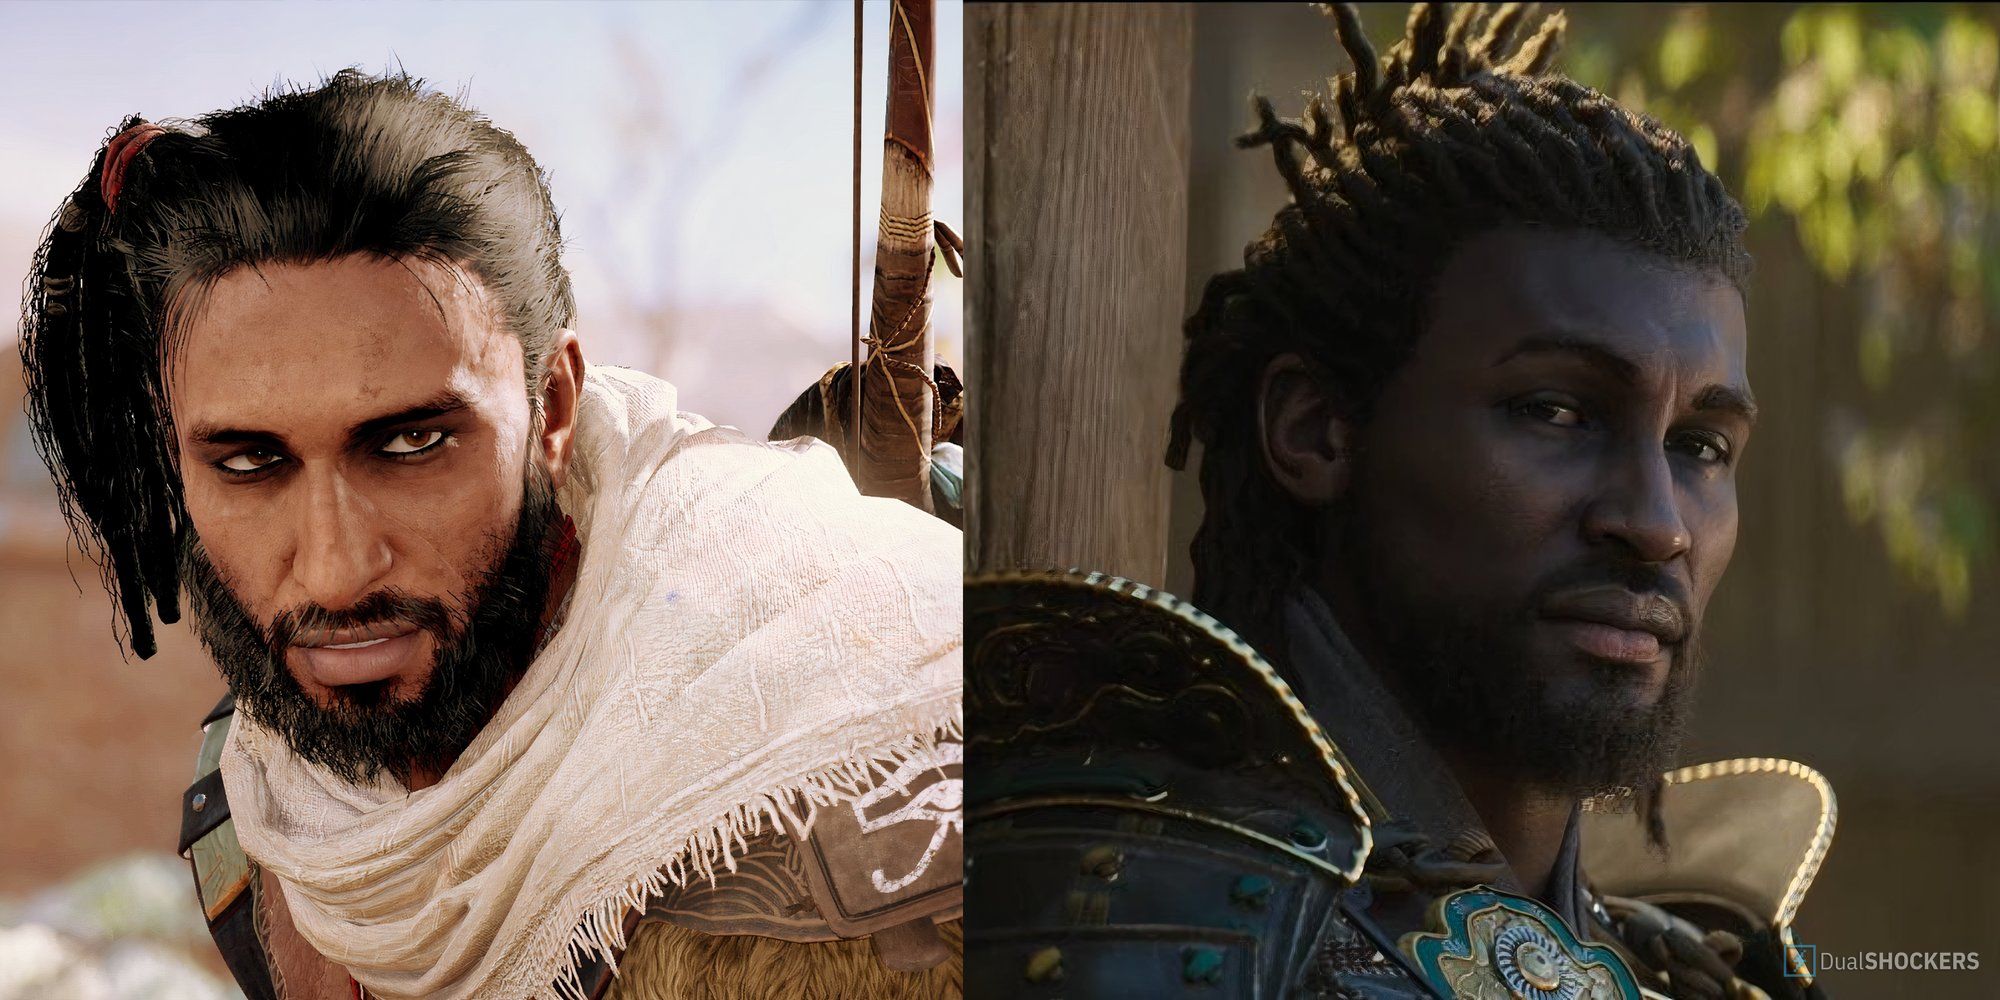 “I’m Sure Your Hill Has A Lovely View” Assassin’s Creed Origins Actor Expresses Dismay at Yasuke Controversy